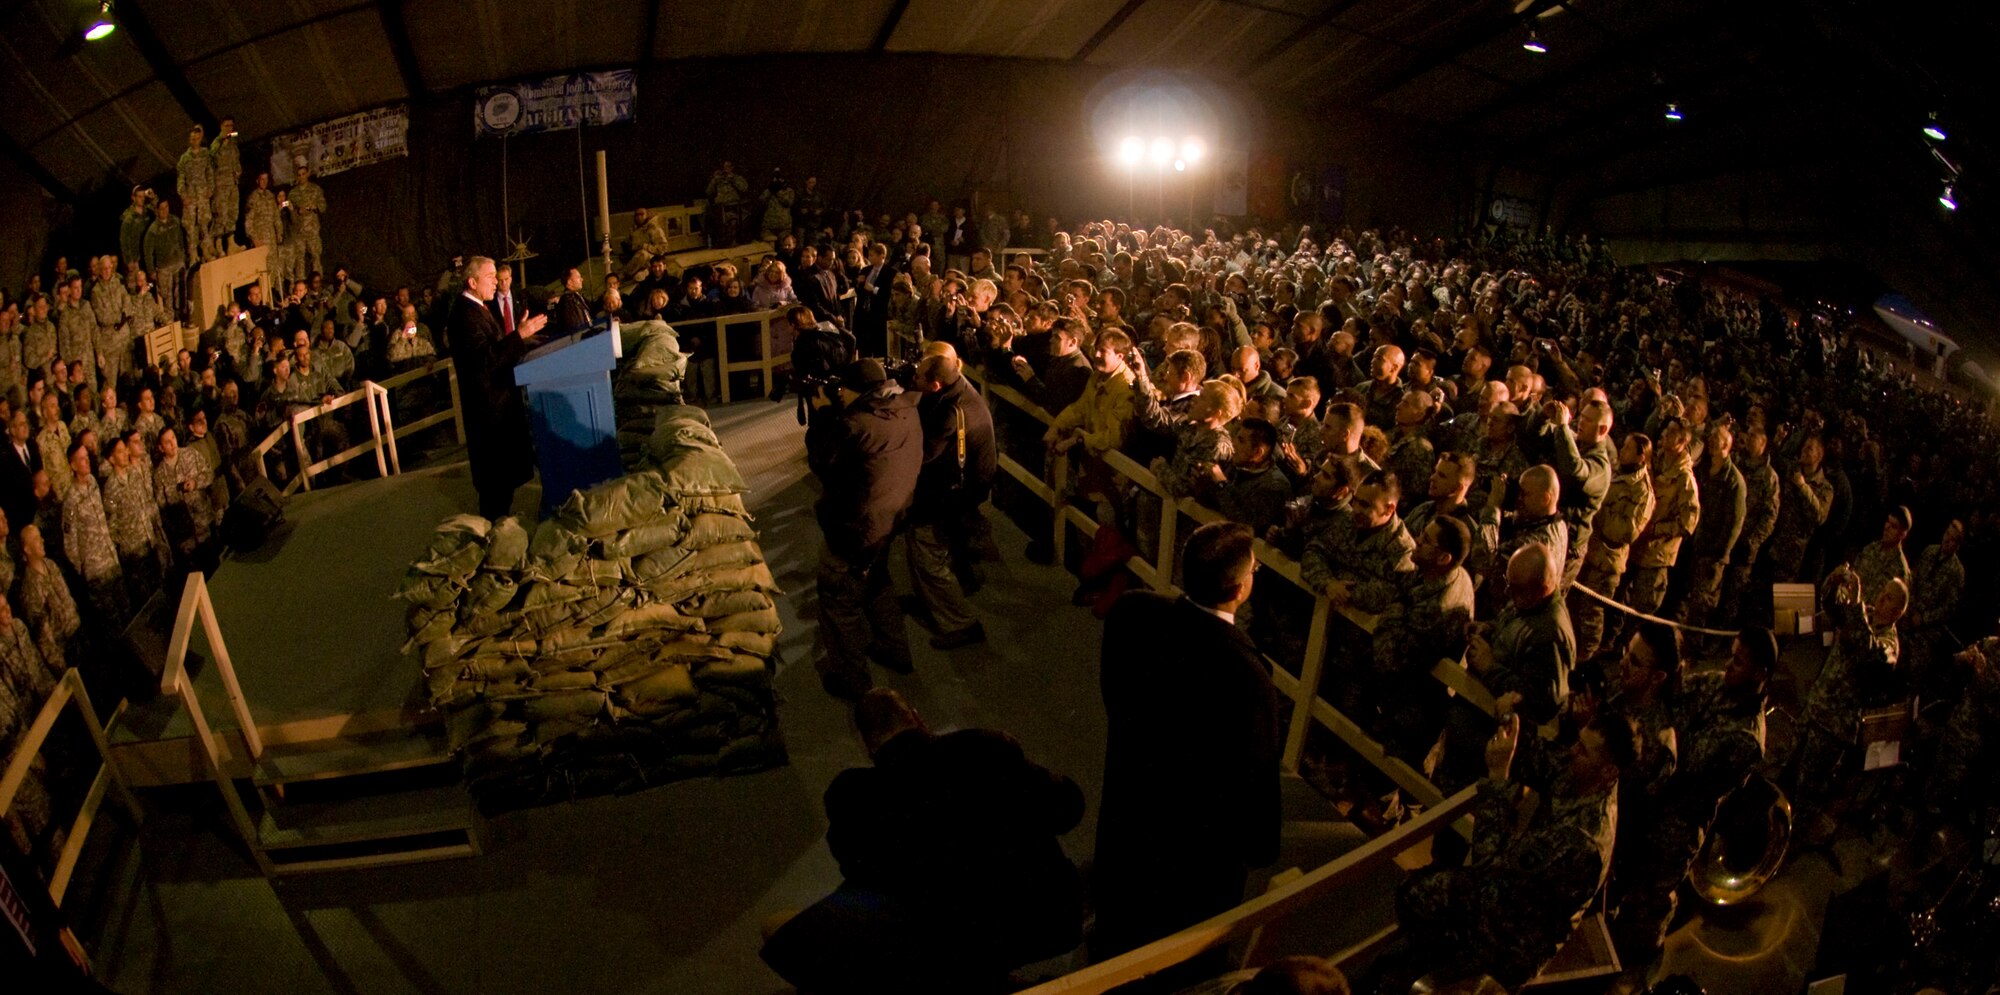 President George W. Bush addresses a crowd of military personnel and civilians gathered at Bagram Air Field, Afghanistan, Dec. 15. President Bush offered words of encouragement about the continued conflict in Afghanistan. (U.S. Air Force photo by Staff Sgt. Samuel Morse)(Released)